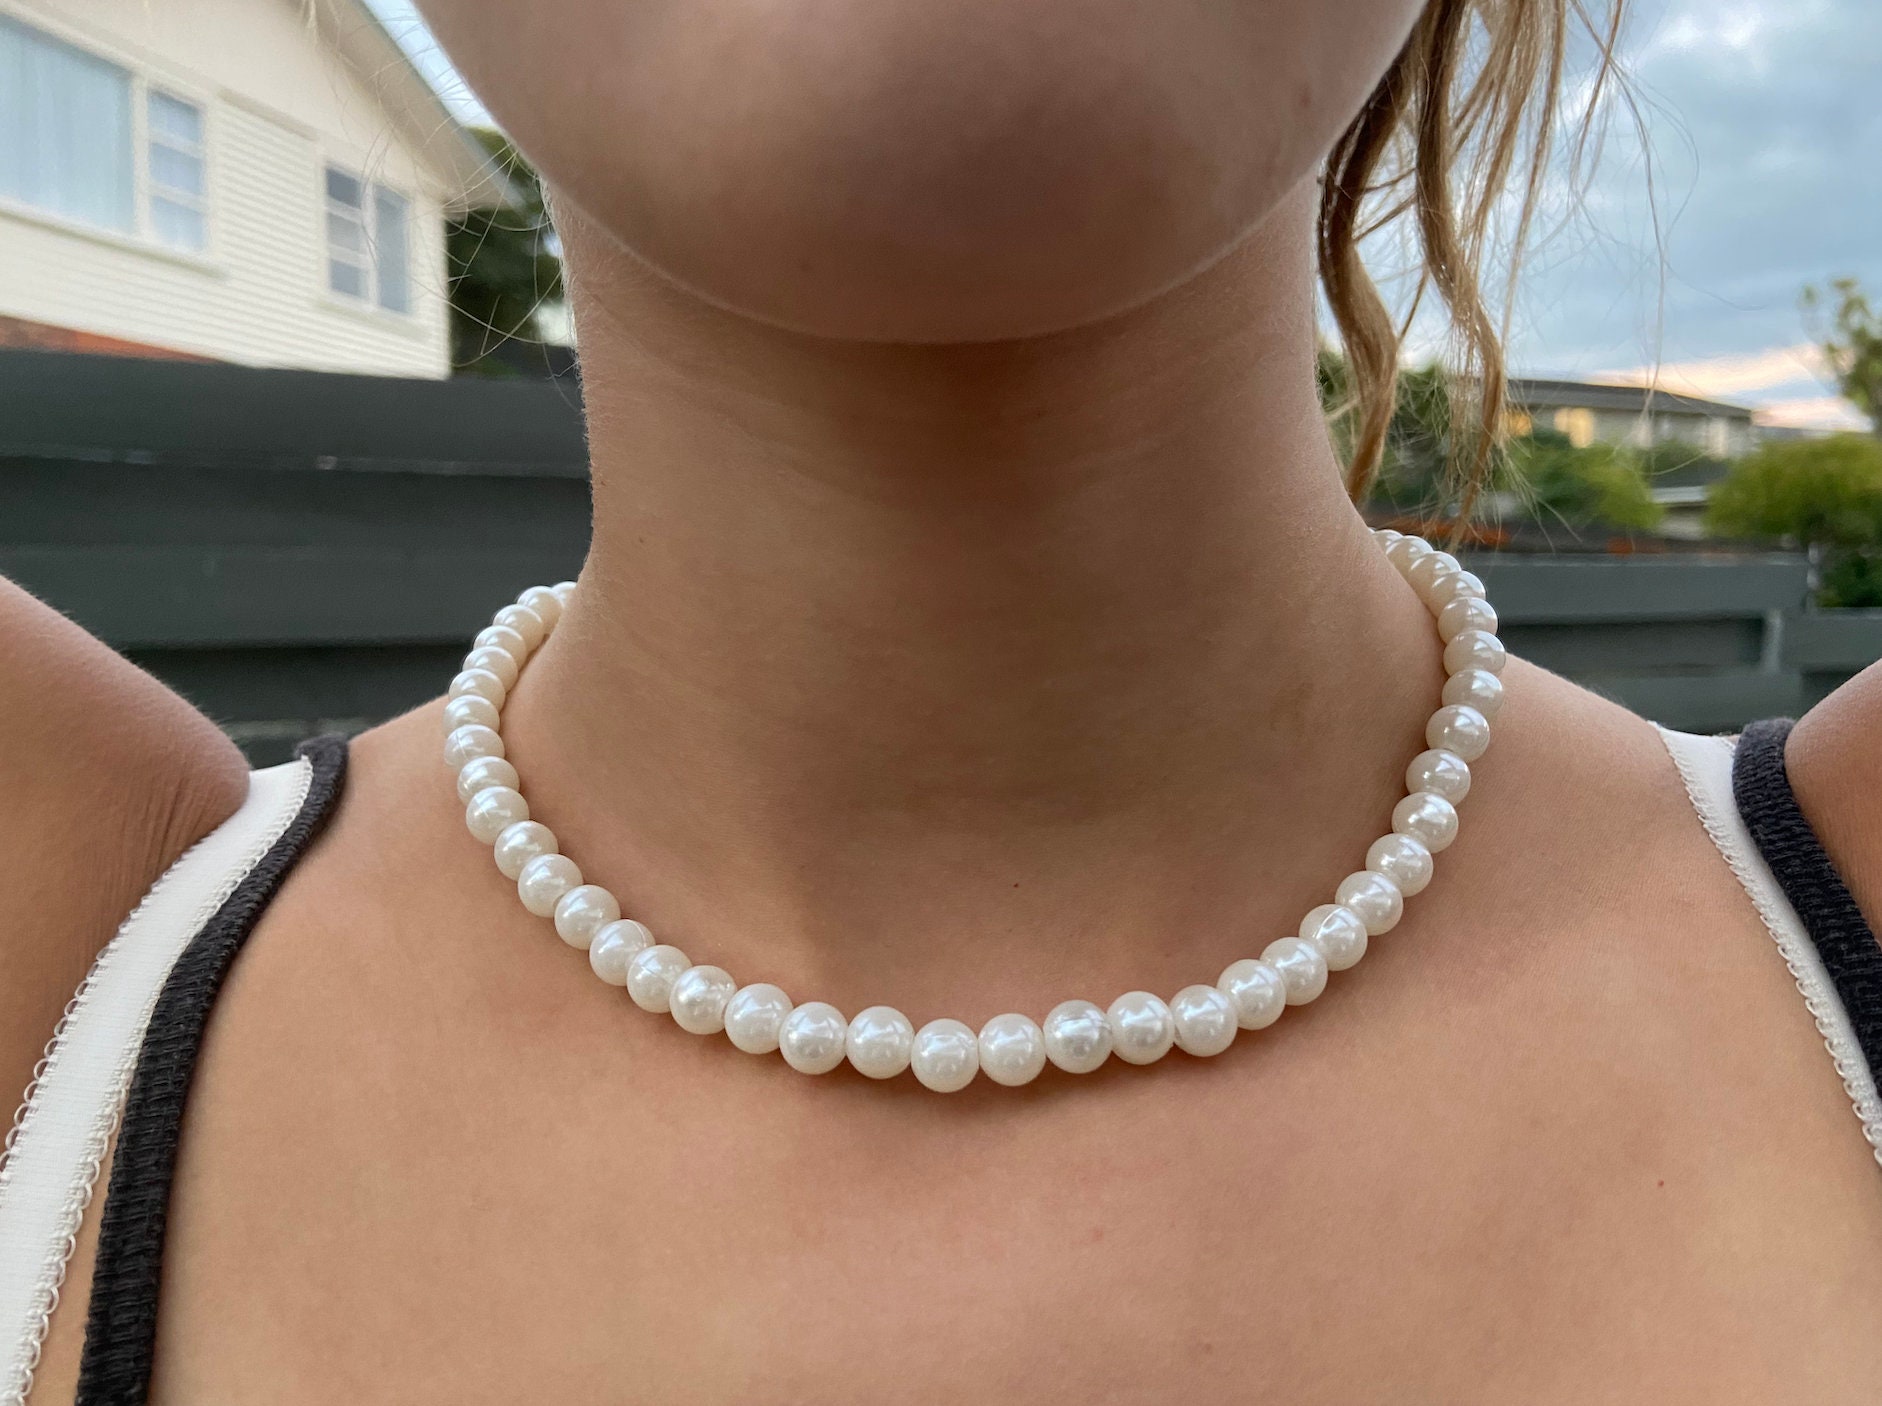 add a pearl necklace